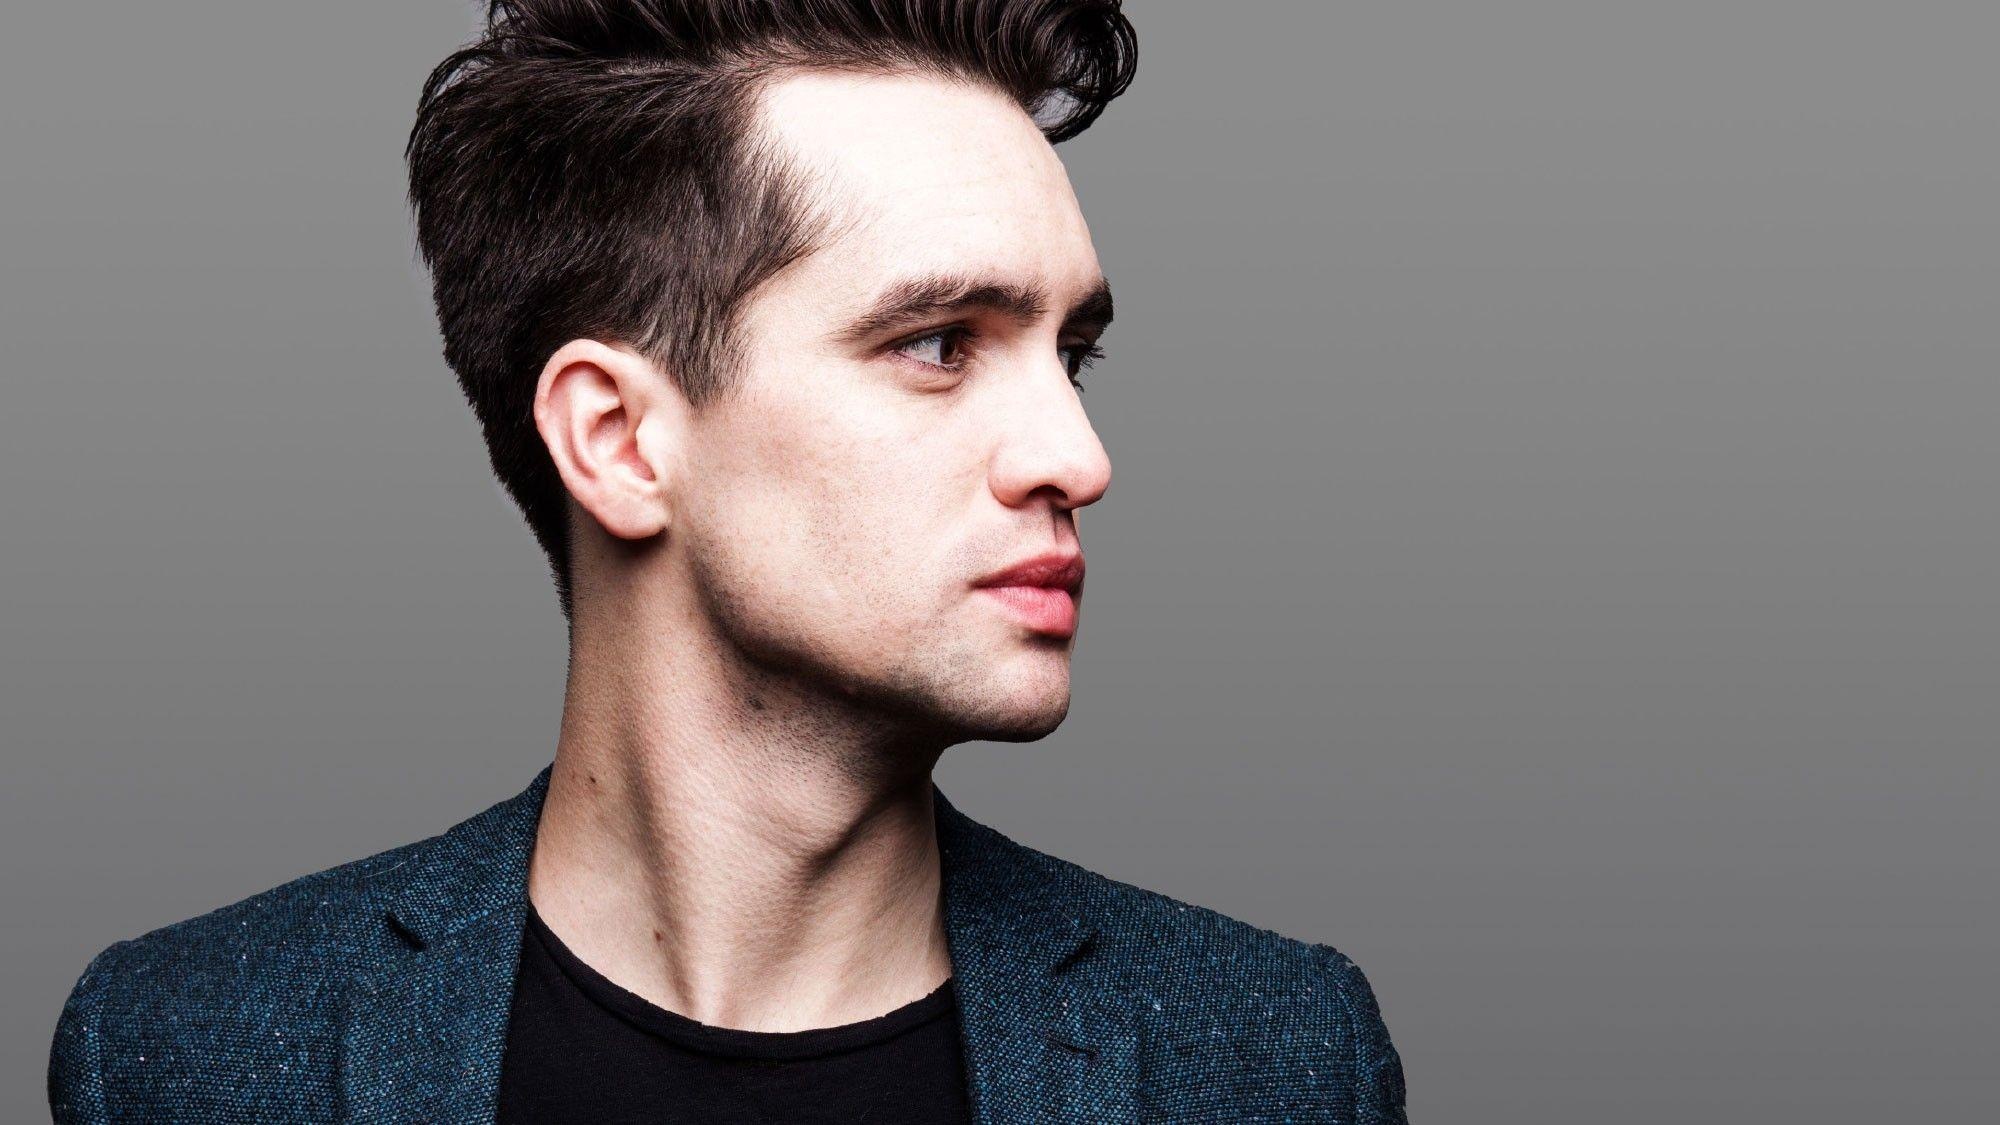 Brendon Urie: Former lead vocalist and frontman of Panic! at the Disco, The only member to stay throughout the band's 19-year run. 2000x1130 HD Wallpaper.